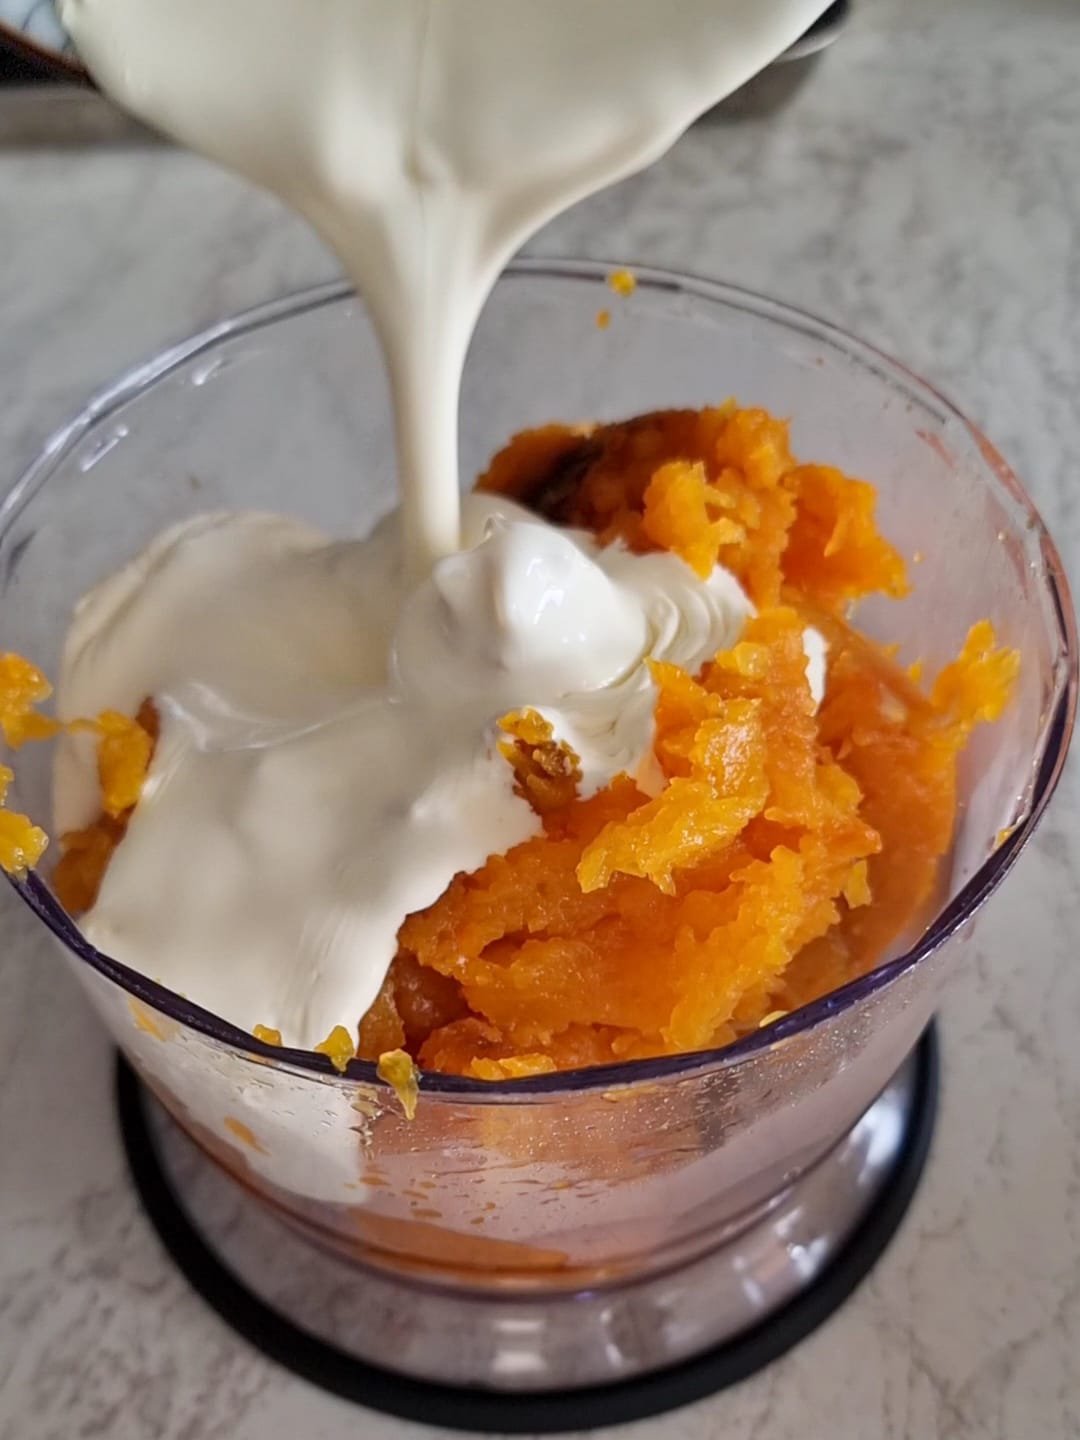 Blend together 2 cups of butternut squash flesh with the double cream.  You can use single cream if you prefer. 